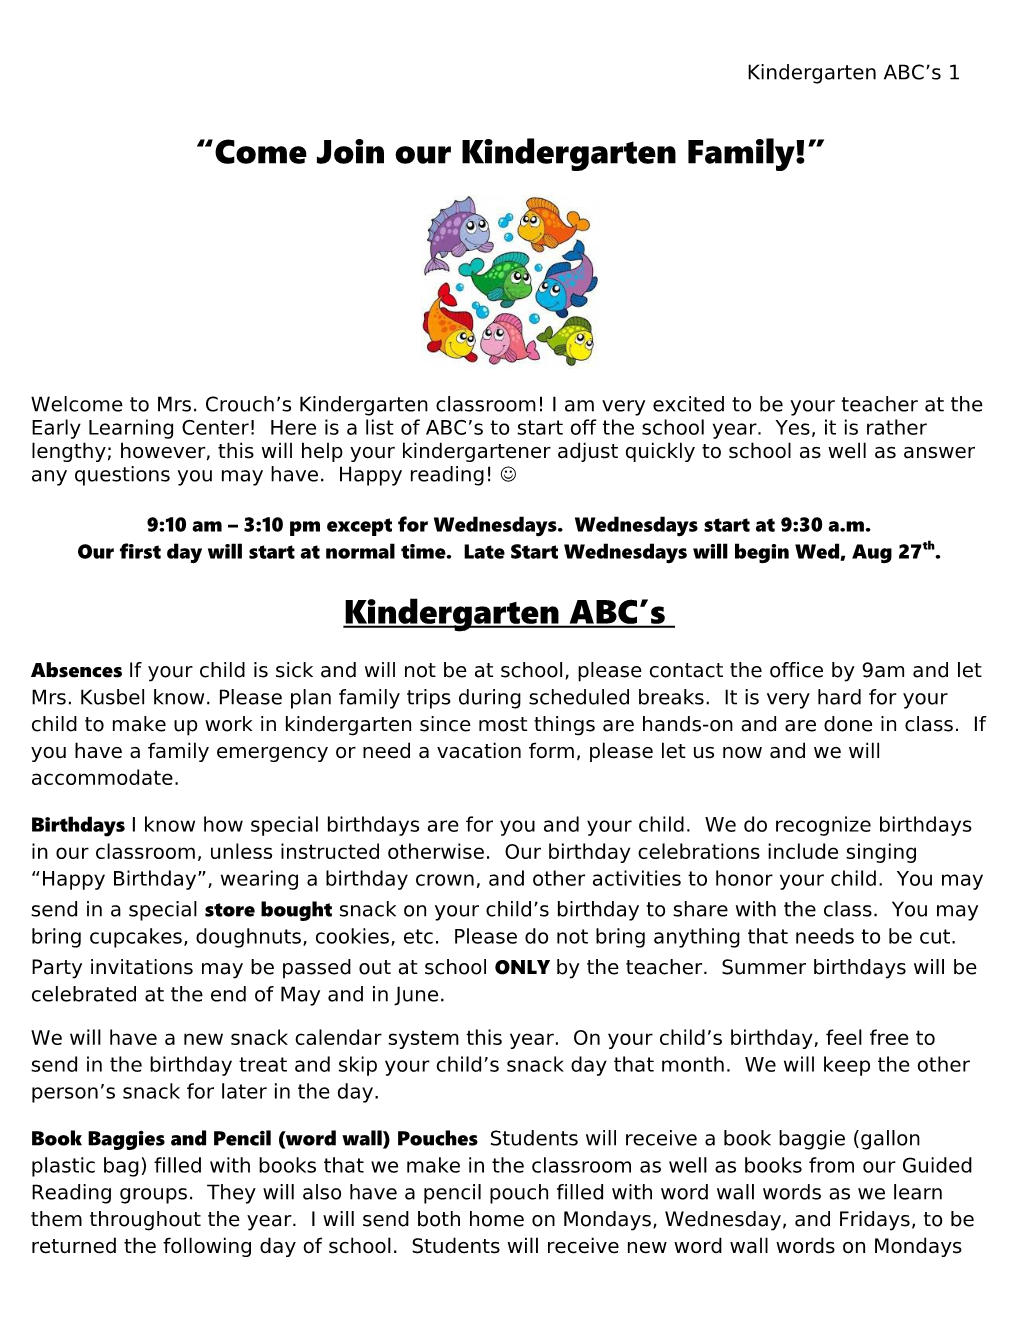 Come Join Our Kindergarten Family!